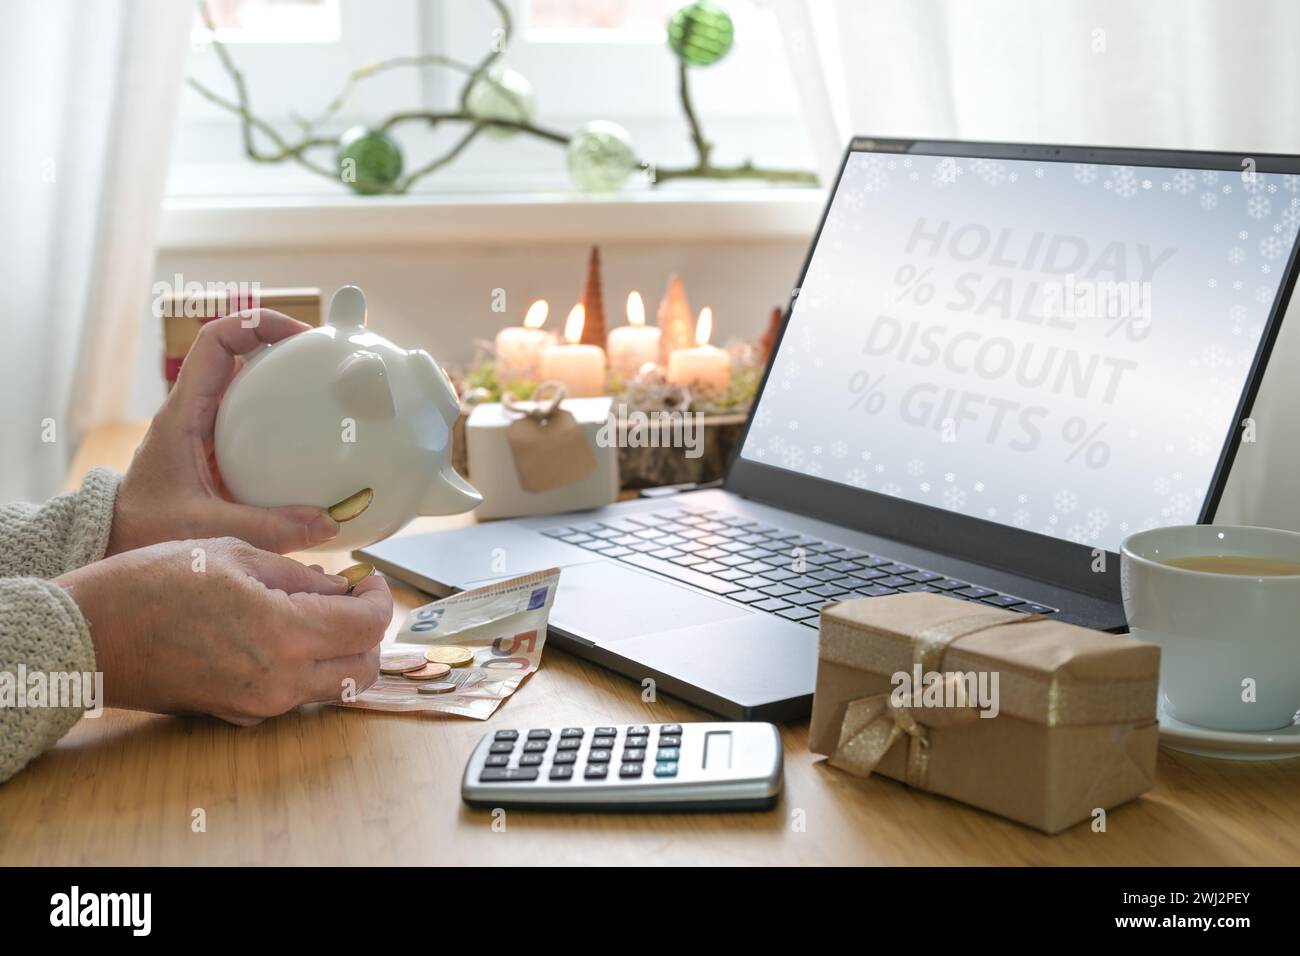 Womans hands shaking coins out of a piggy bank while shopping online for Christmas presents to take advantage of holiday discoun Stock Photo